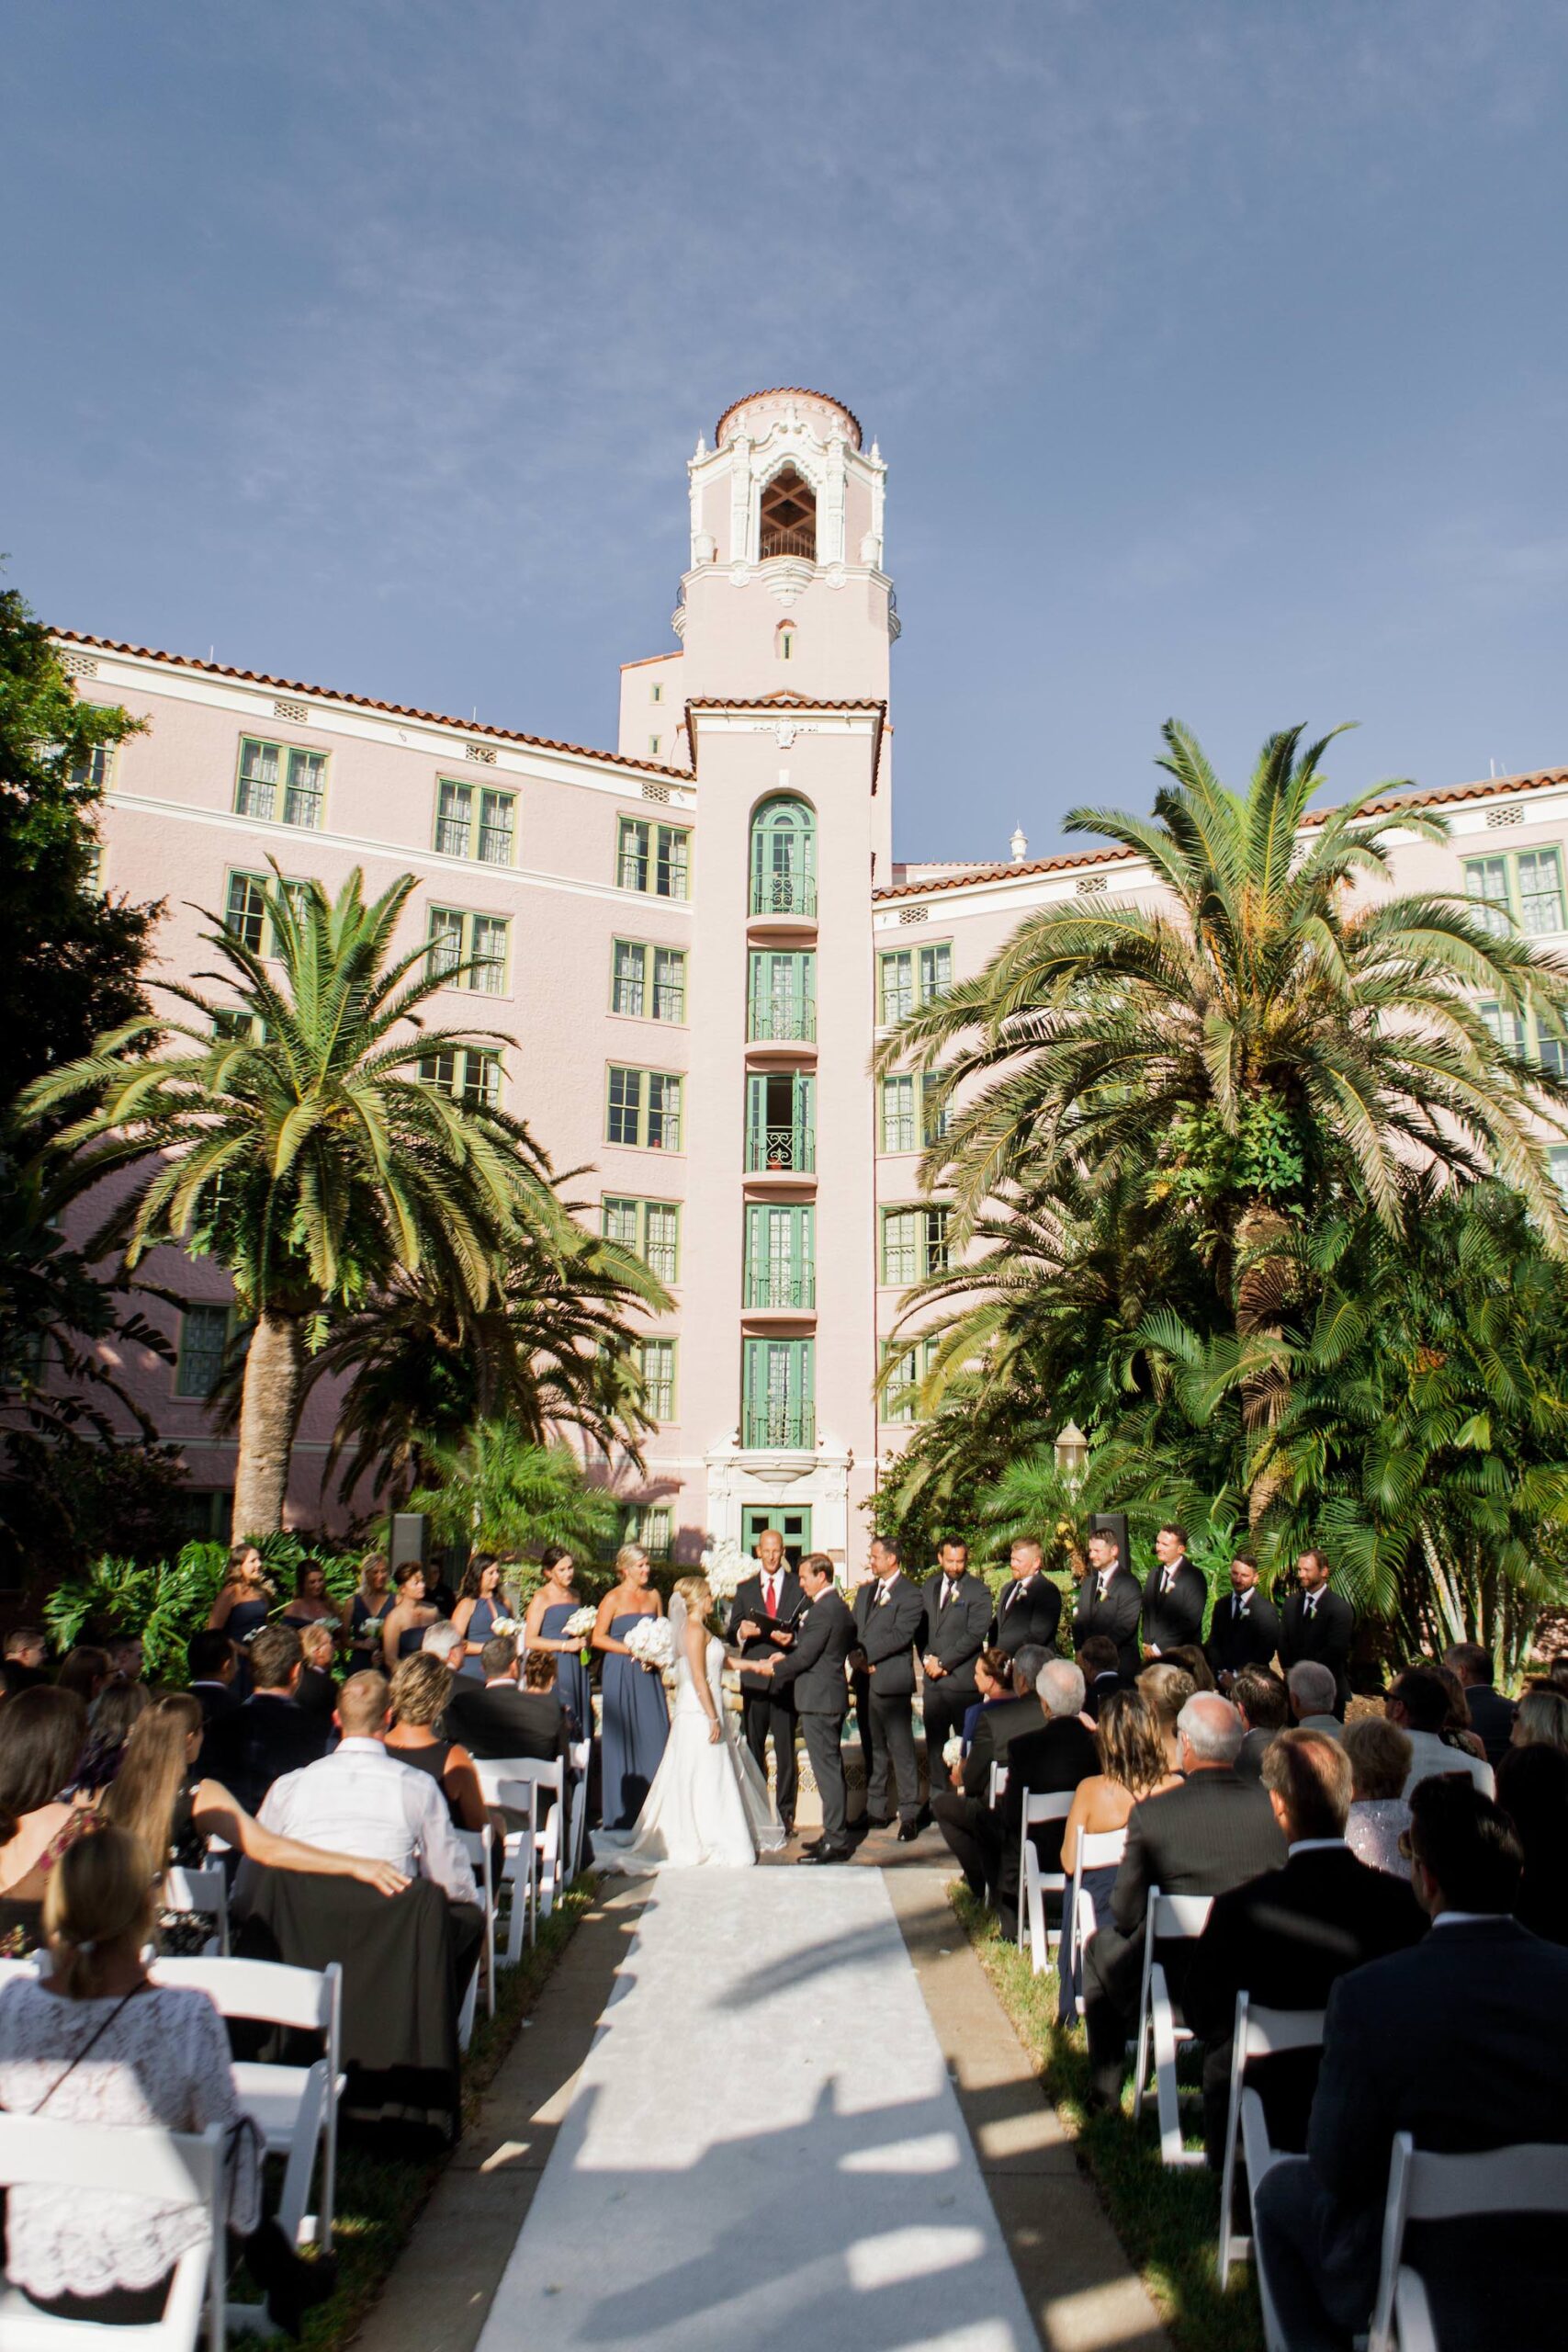 Timeless Classic Bride and Groom Exchanging Wedding Vows During Courtyard Wedding Ceremony | St. Pete Wedding Venue The Vinoy Renaissance